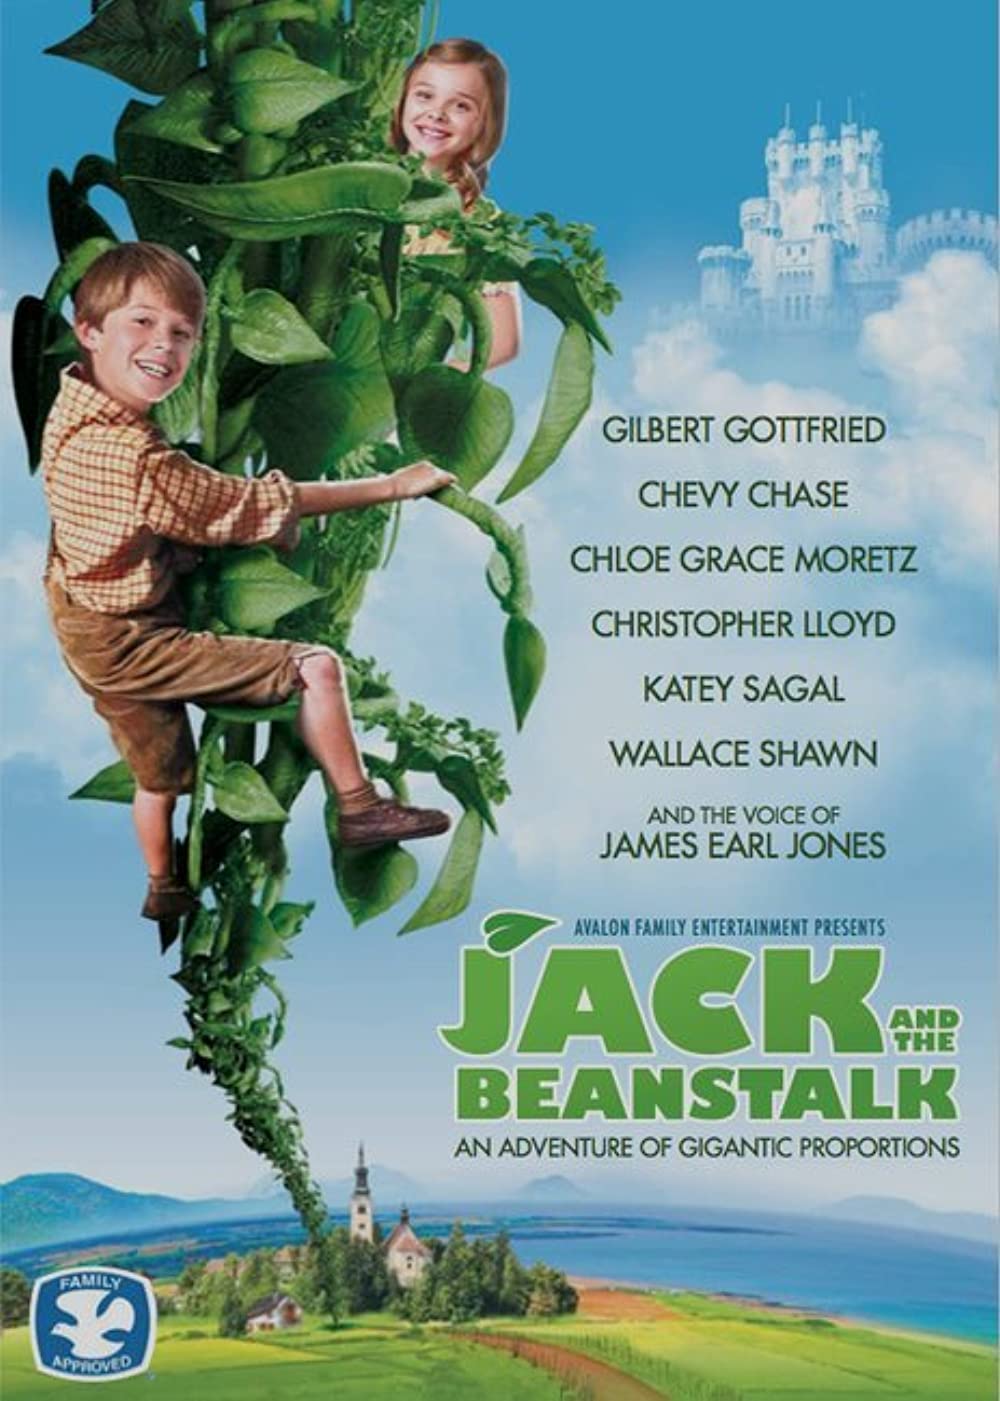 Download Jack and the Beanstalk Movie | Jack And The Beanstalk Dvd